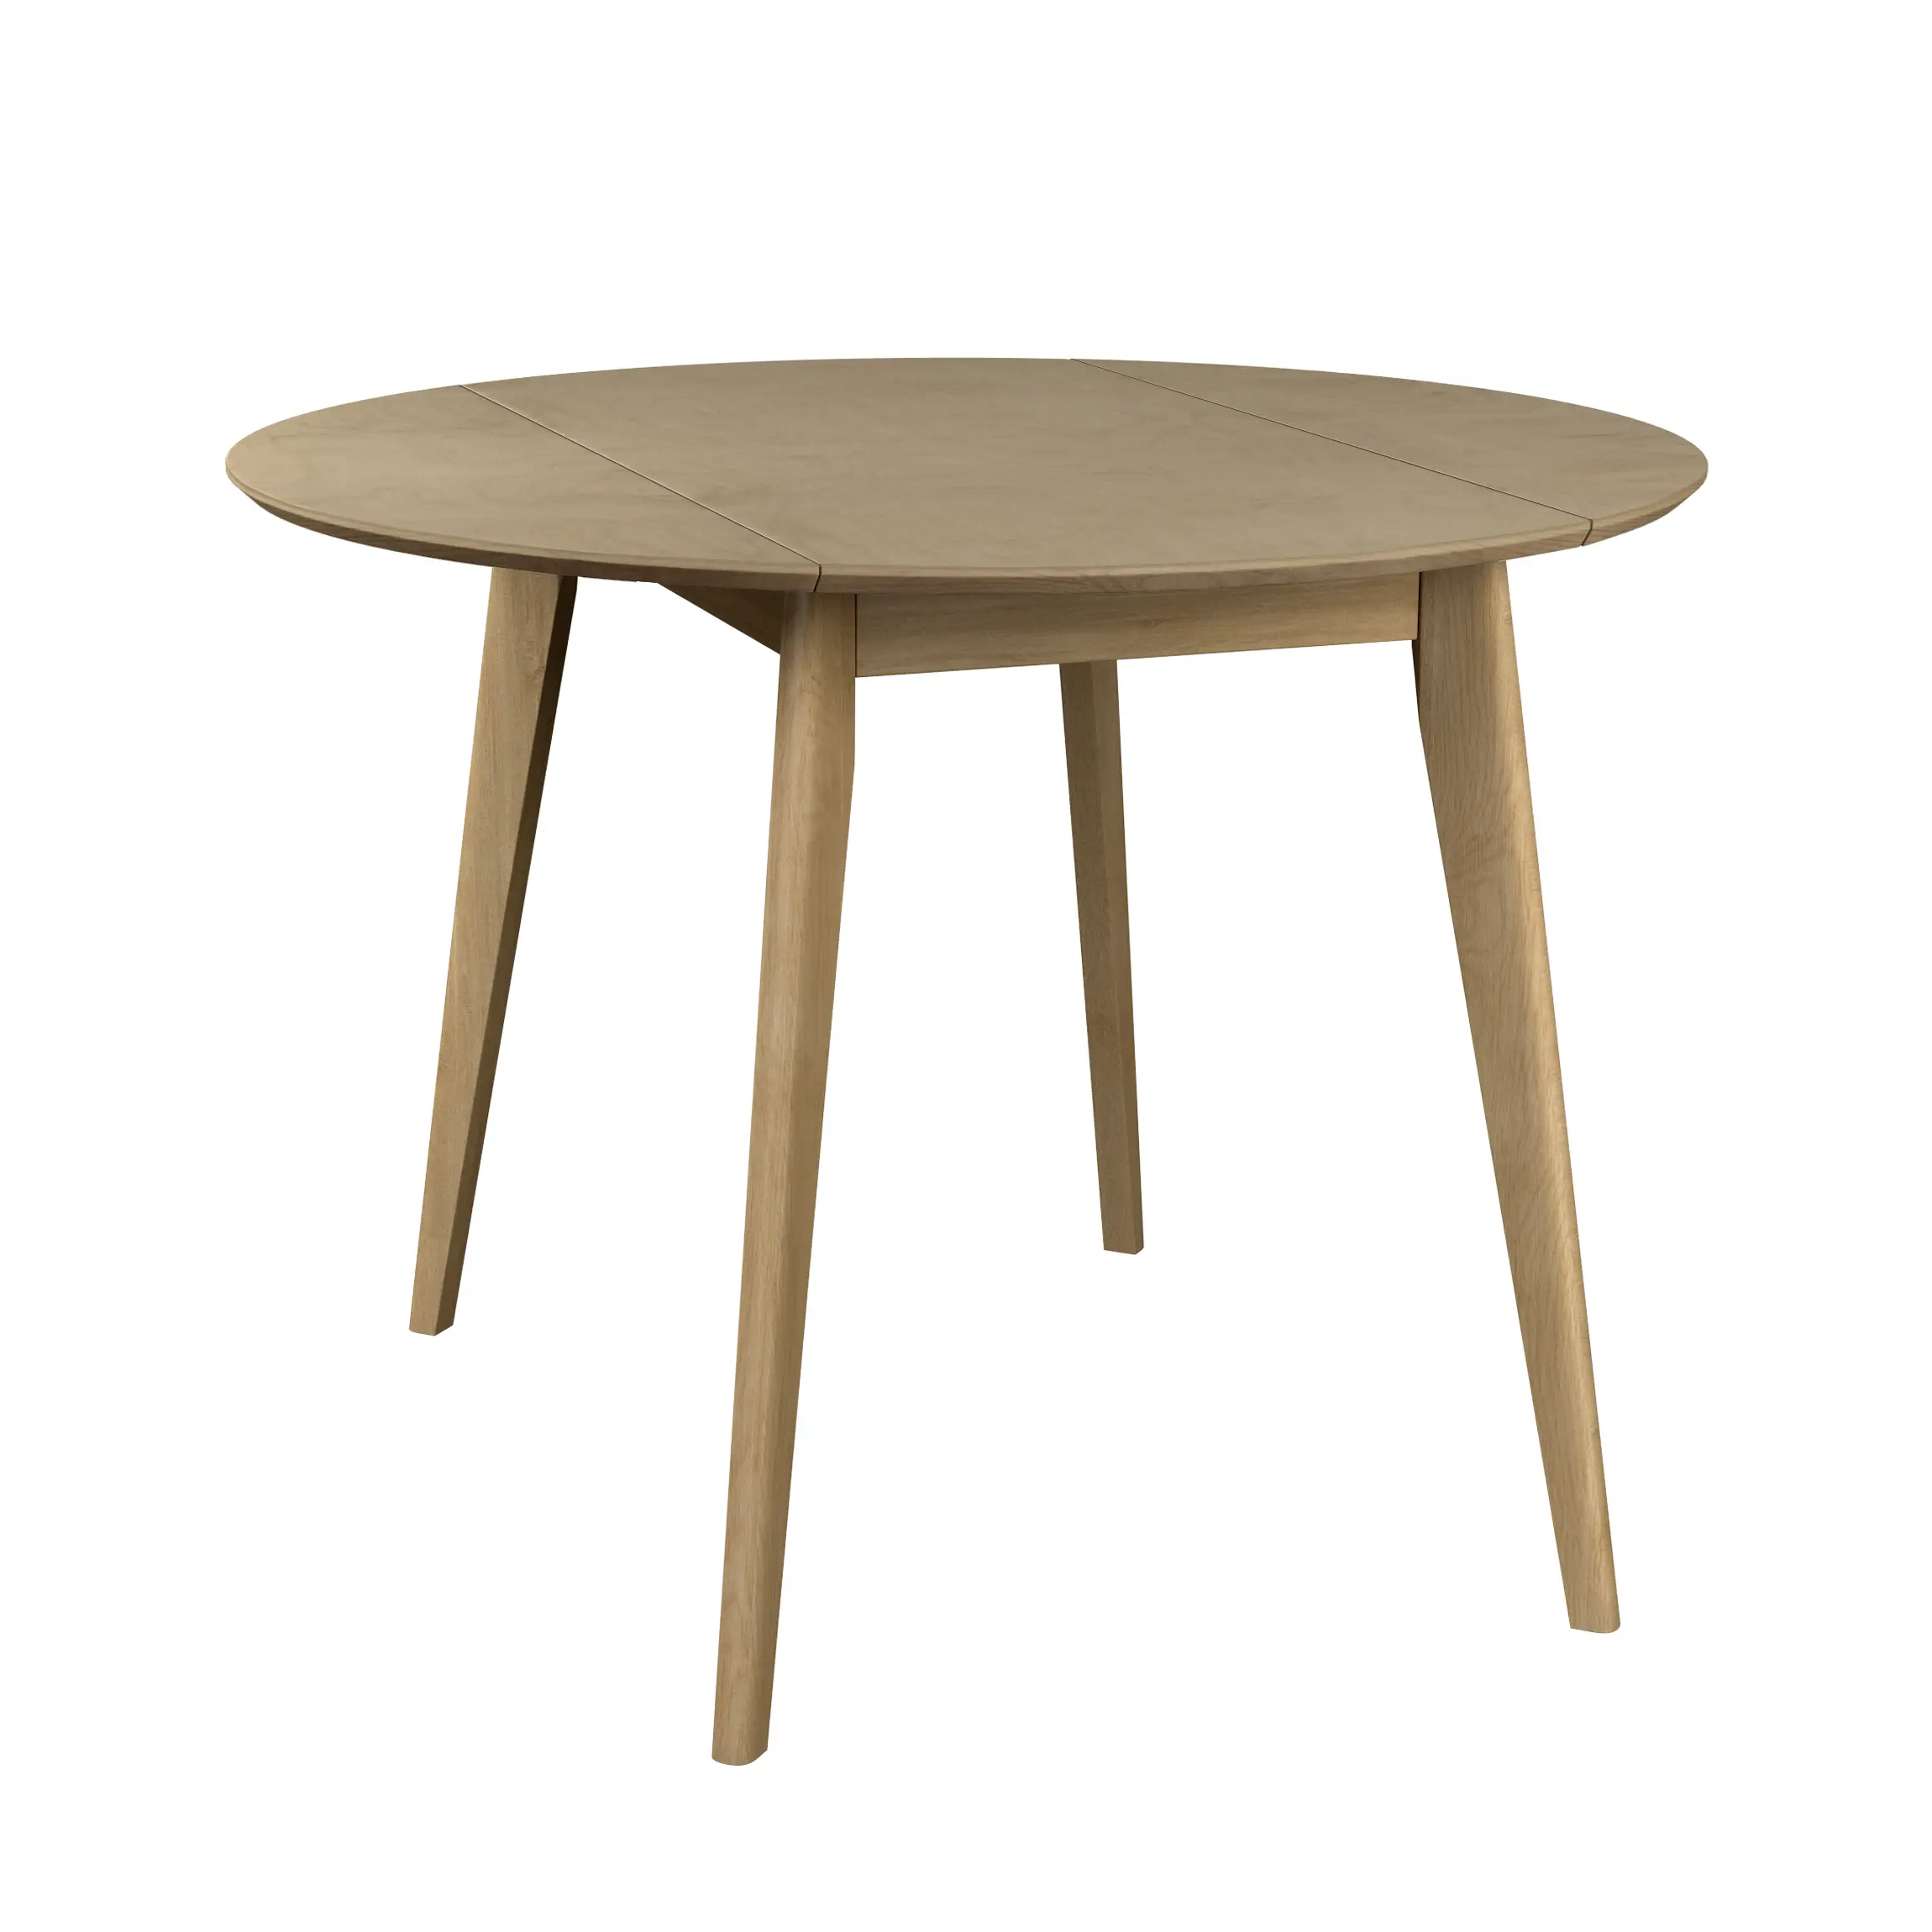 Orion DropLeaf Table Wooden 100cm Round